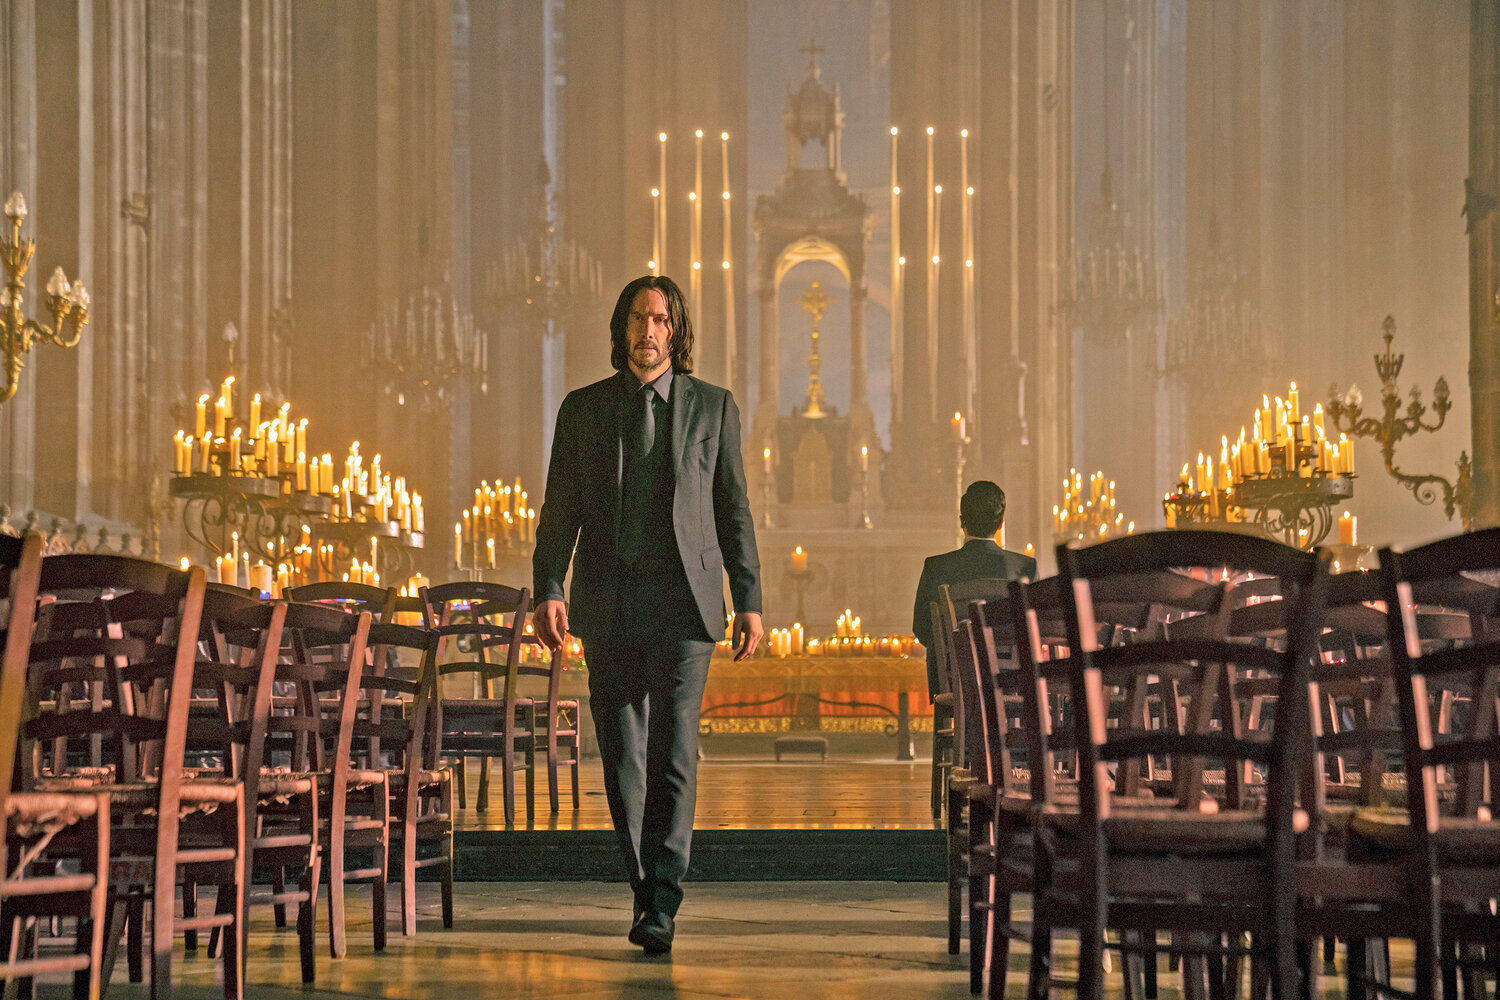 REVIEW: 'John Wick: Chapter 4' is more of the same great action ...